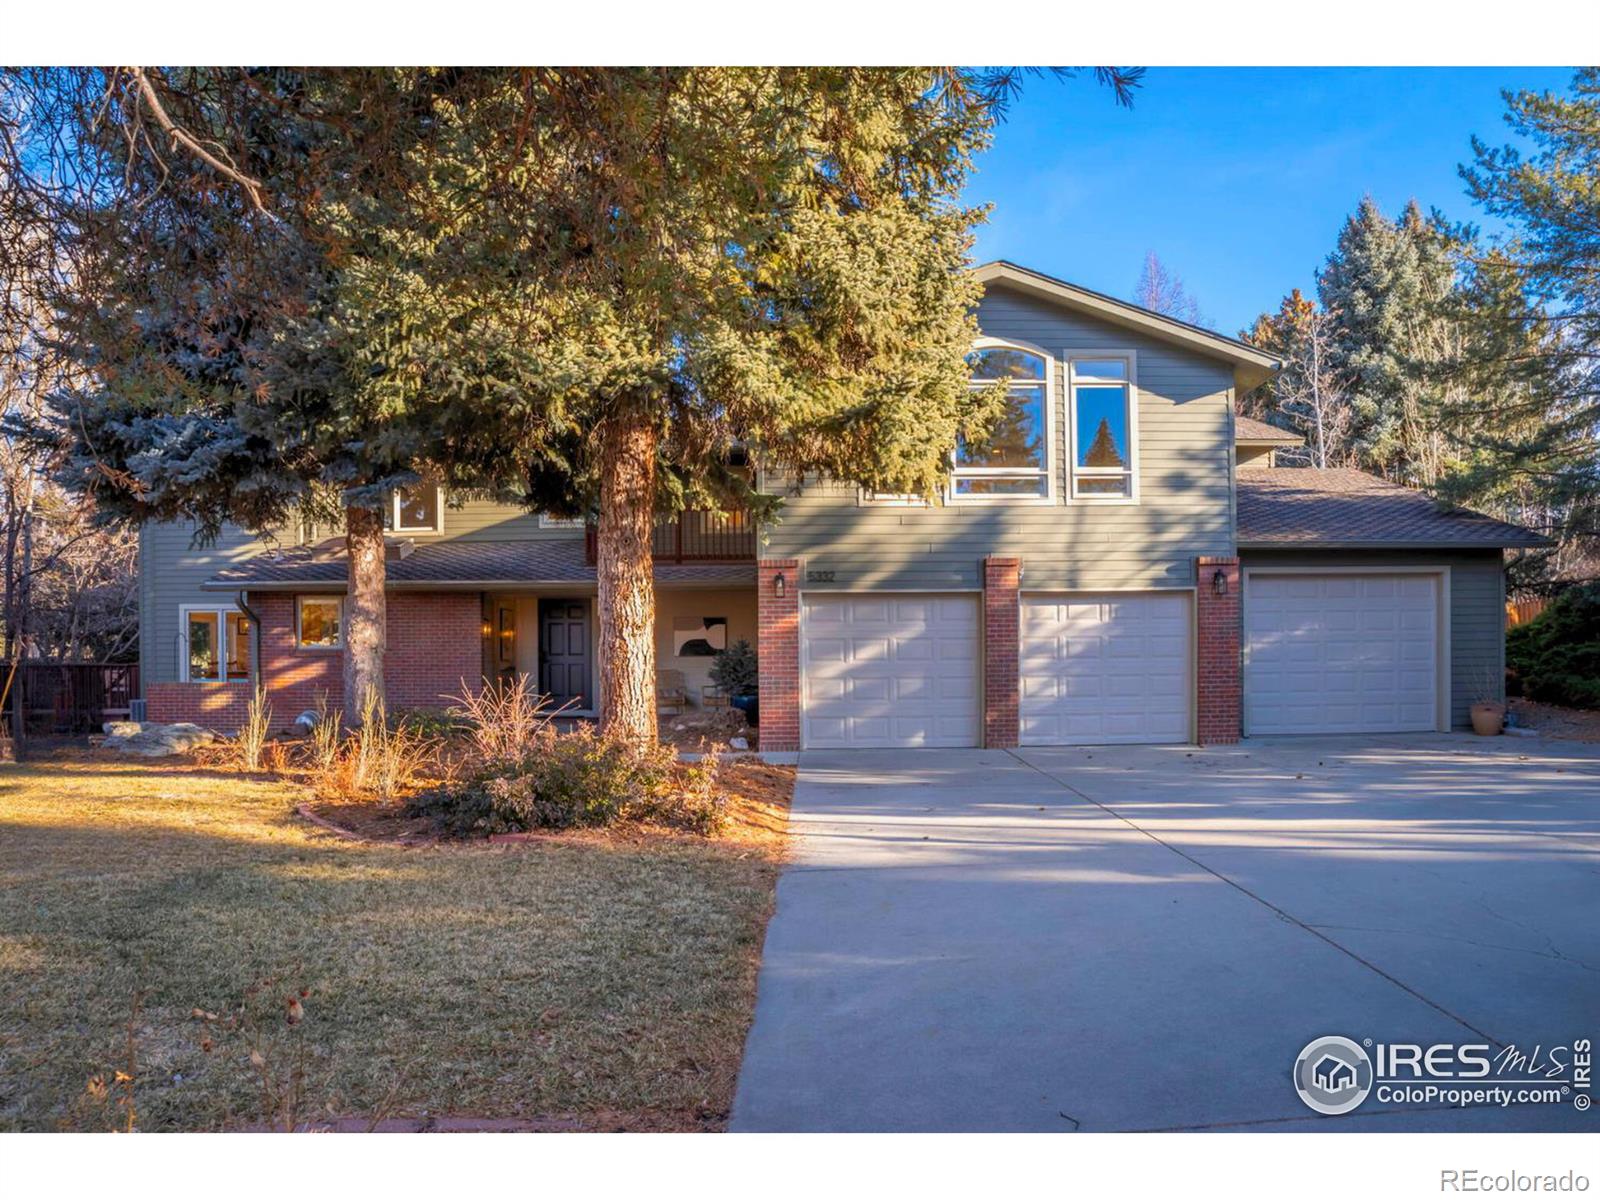 5332  Spotted Horse Trail, boulder MLS: 4567891001685 Beds: 4 Baths: 4 Price: $1,575,000